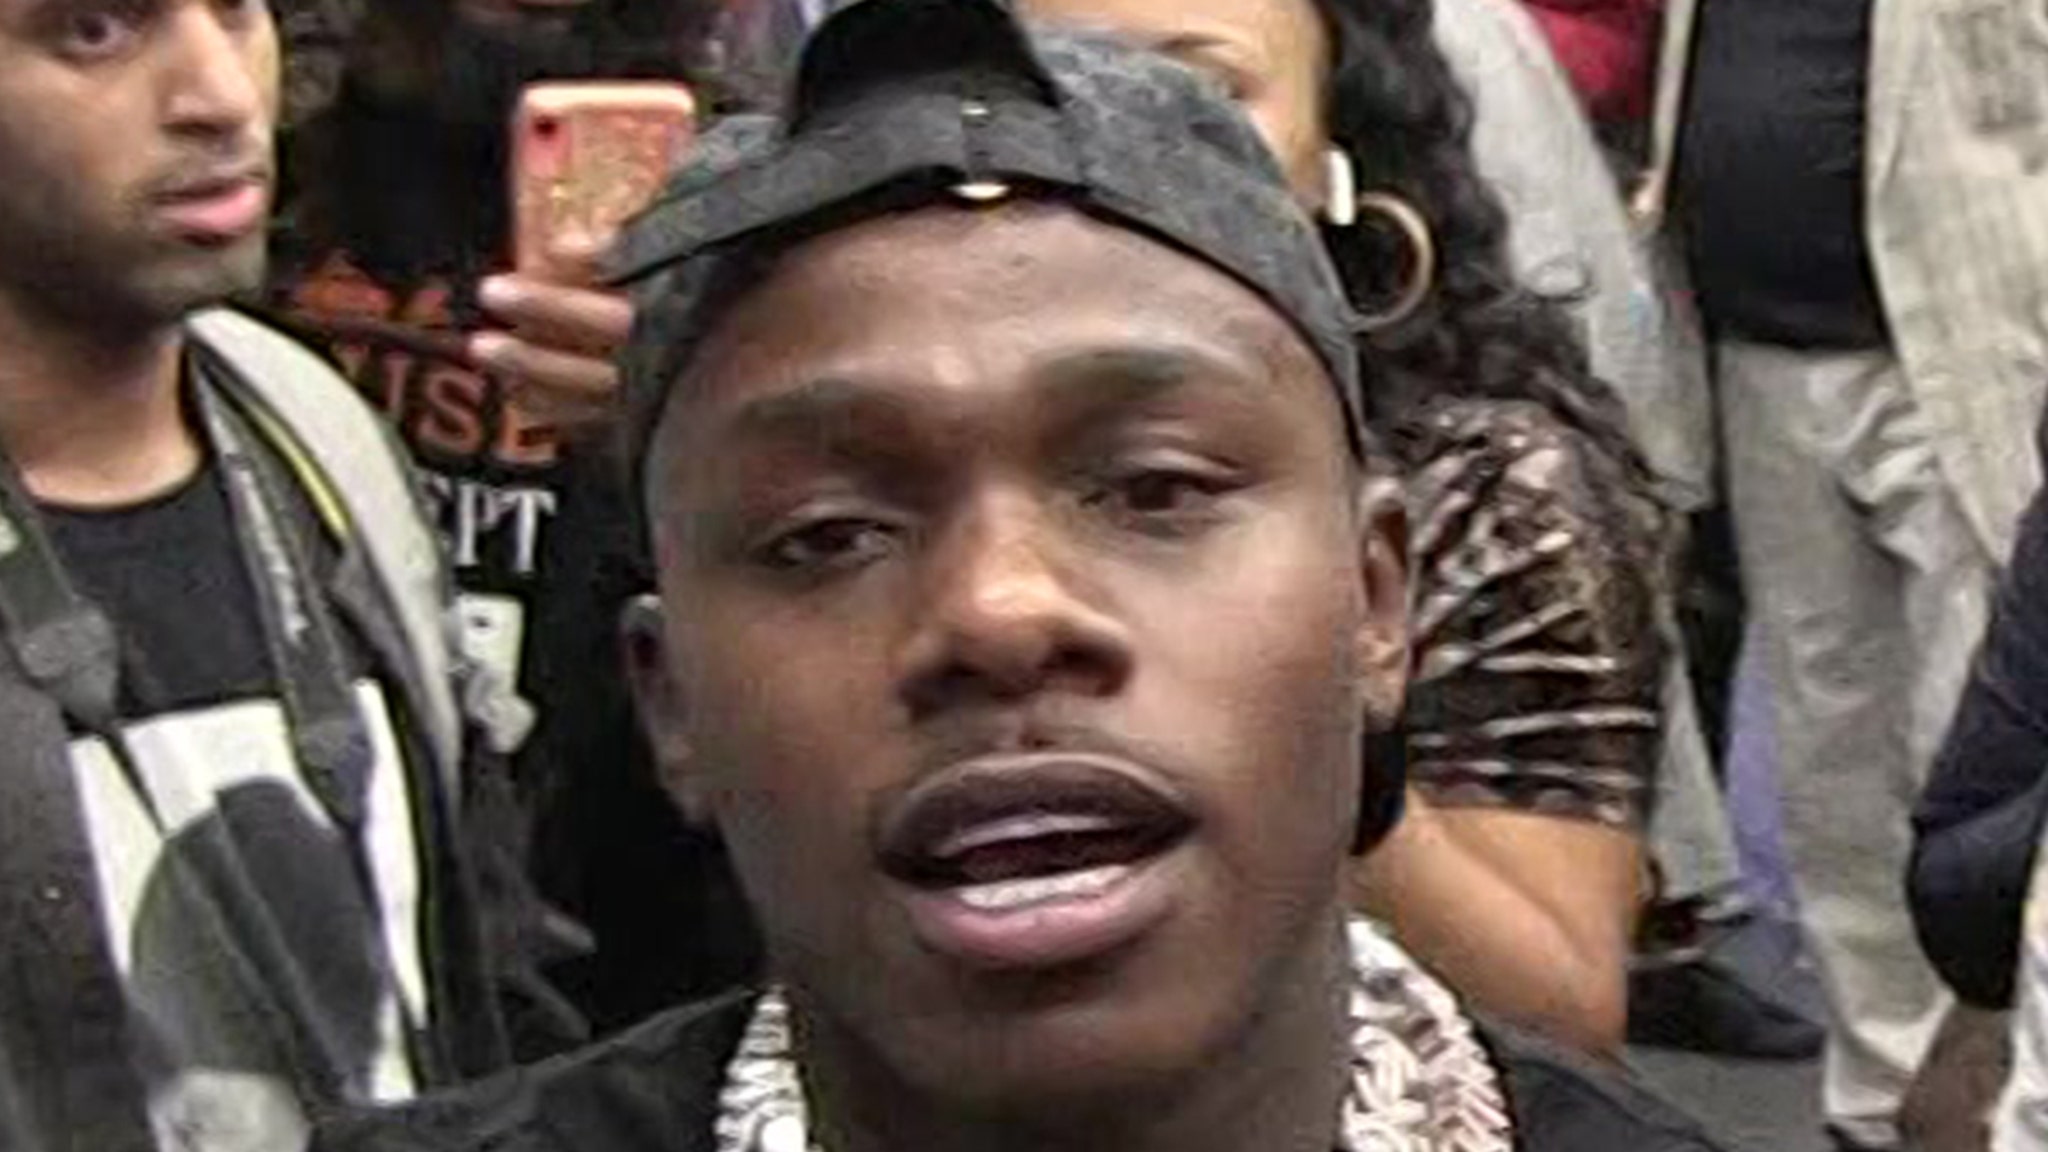 DaBaby Questioned by Cops in Miami Shooting